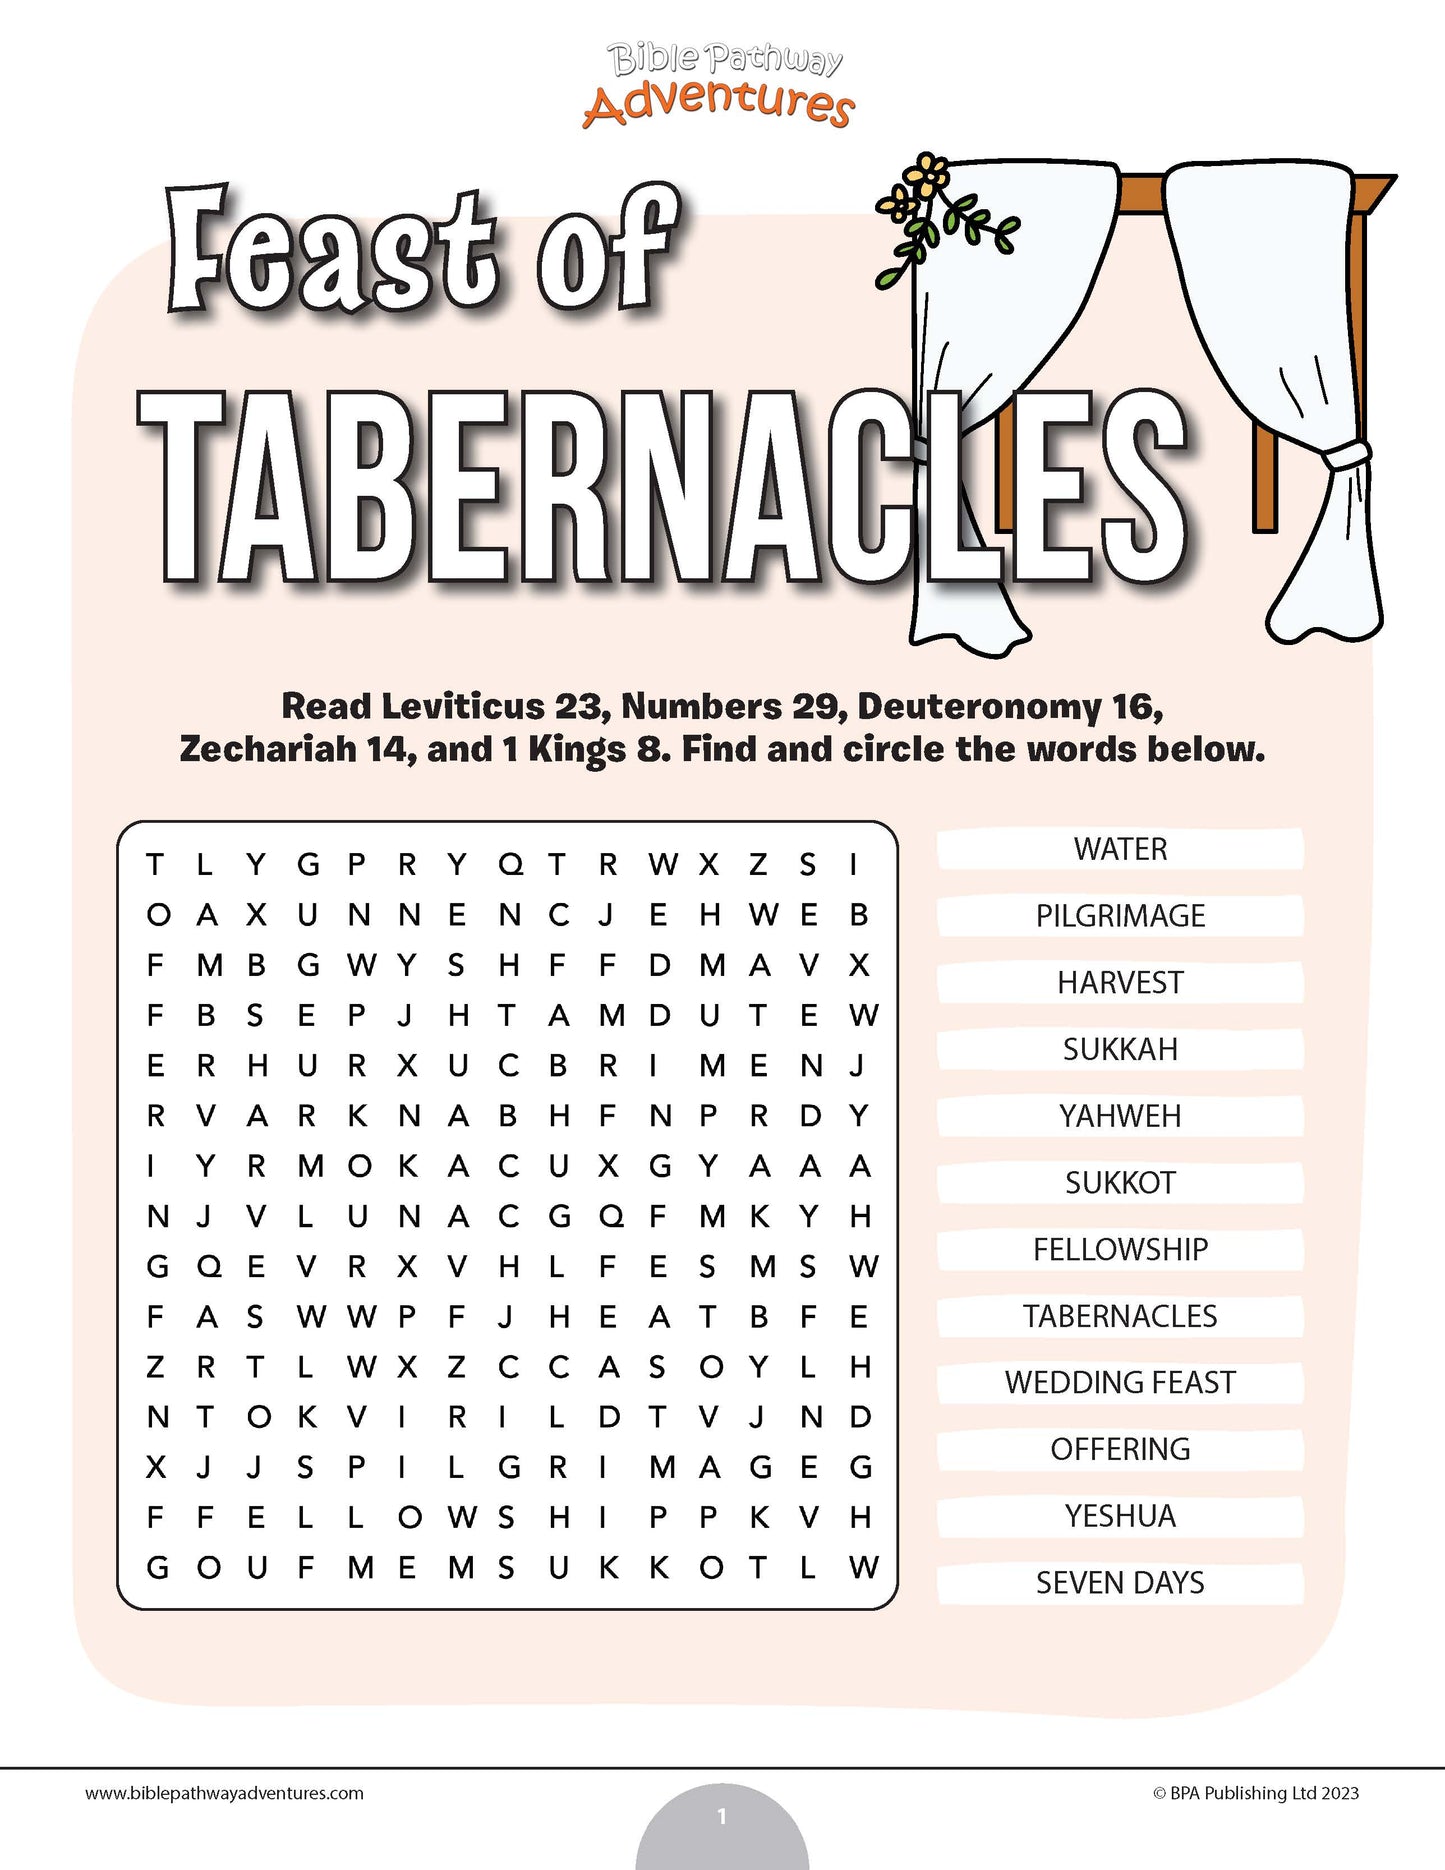 Feast of Tabernacles word search